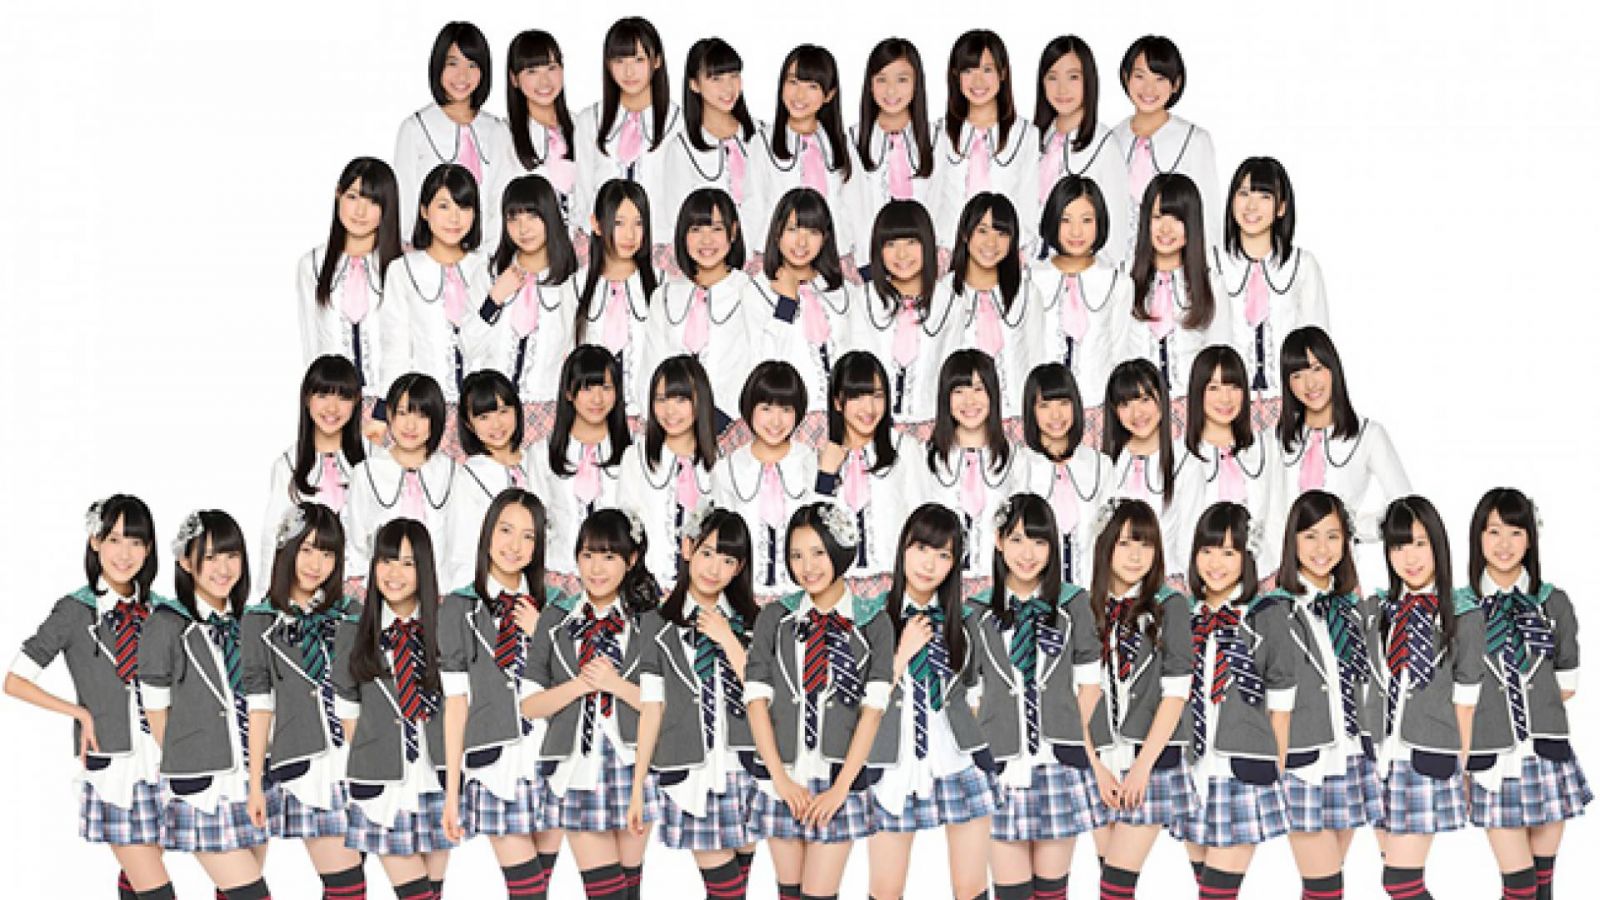 HKT48 mit neuer Single © Universal Music Japan, all rights reserved